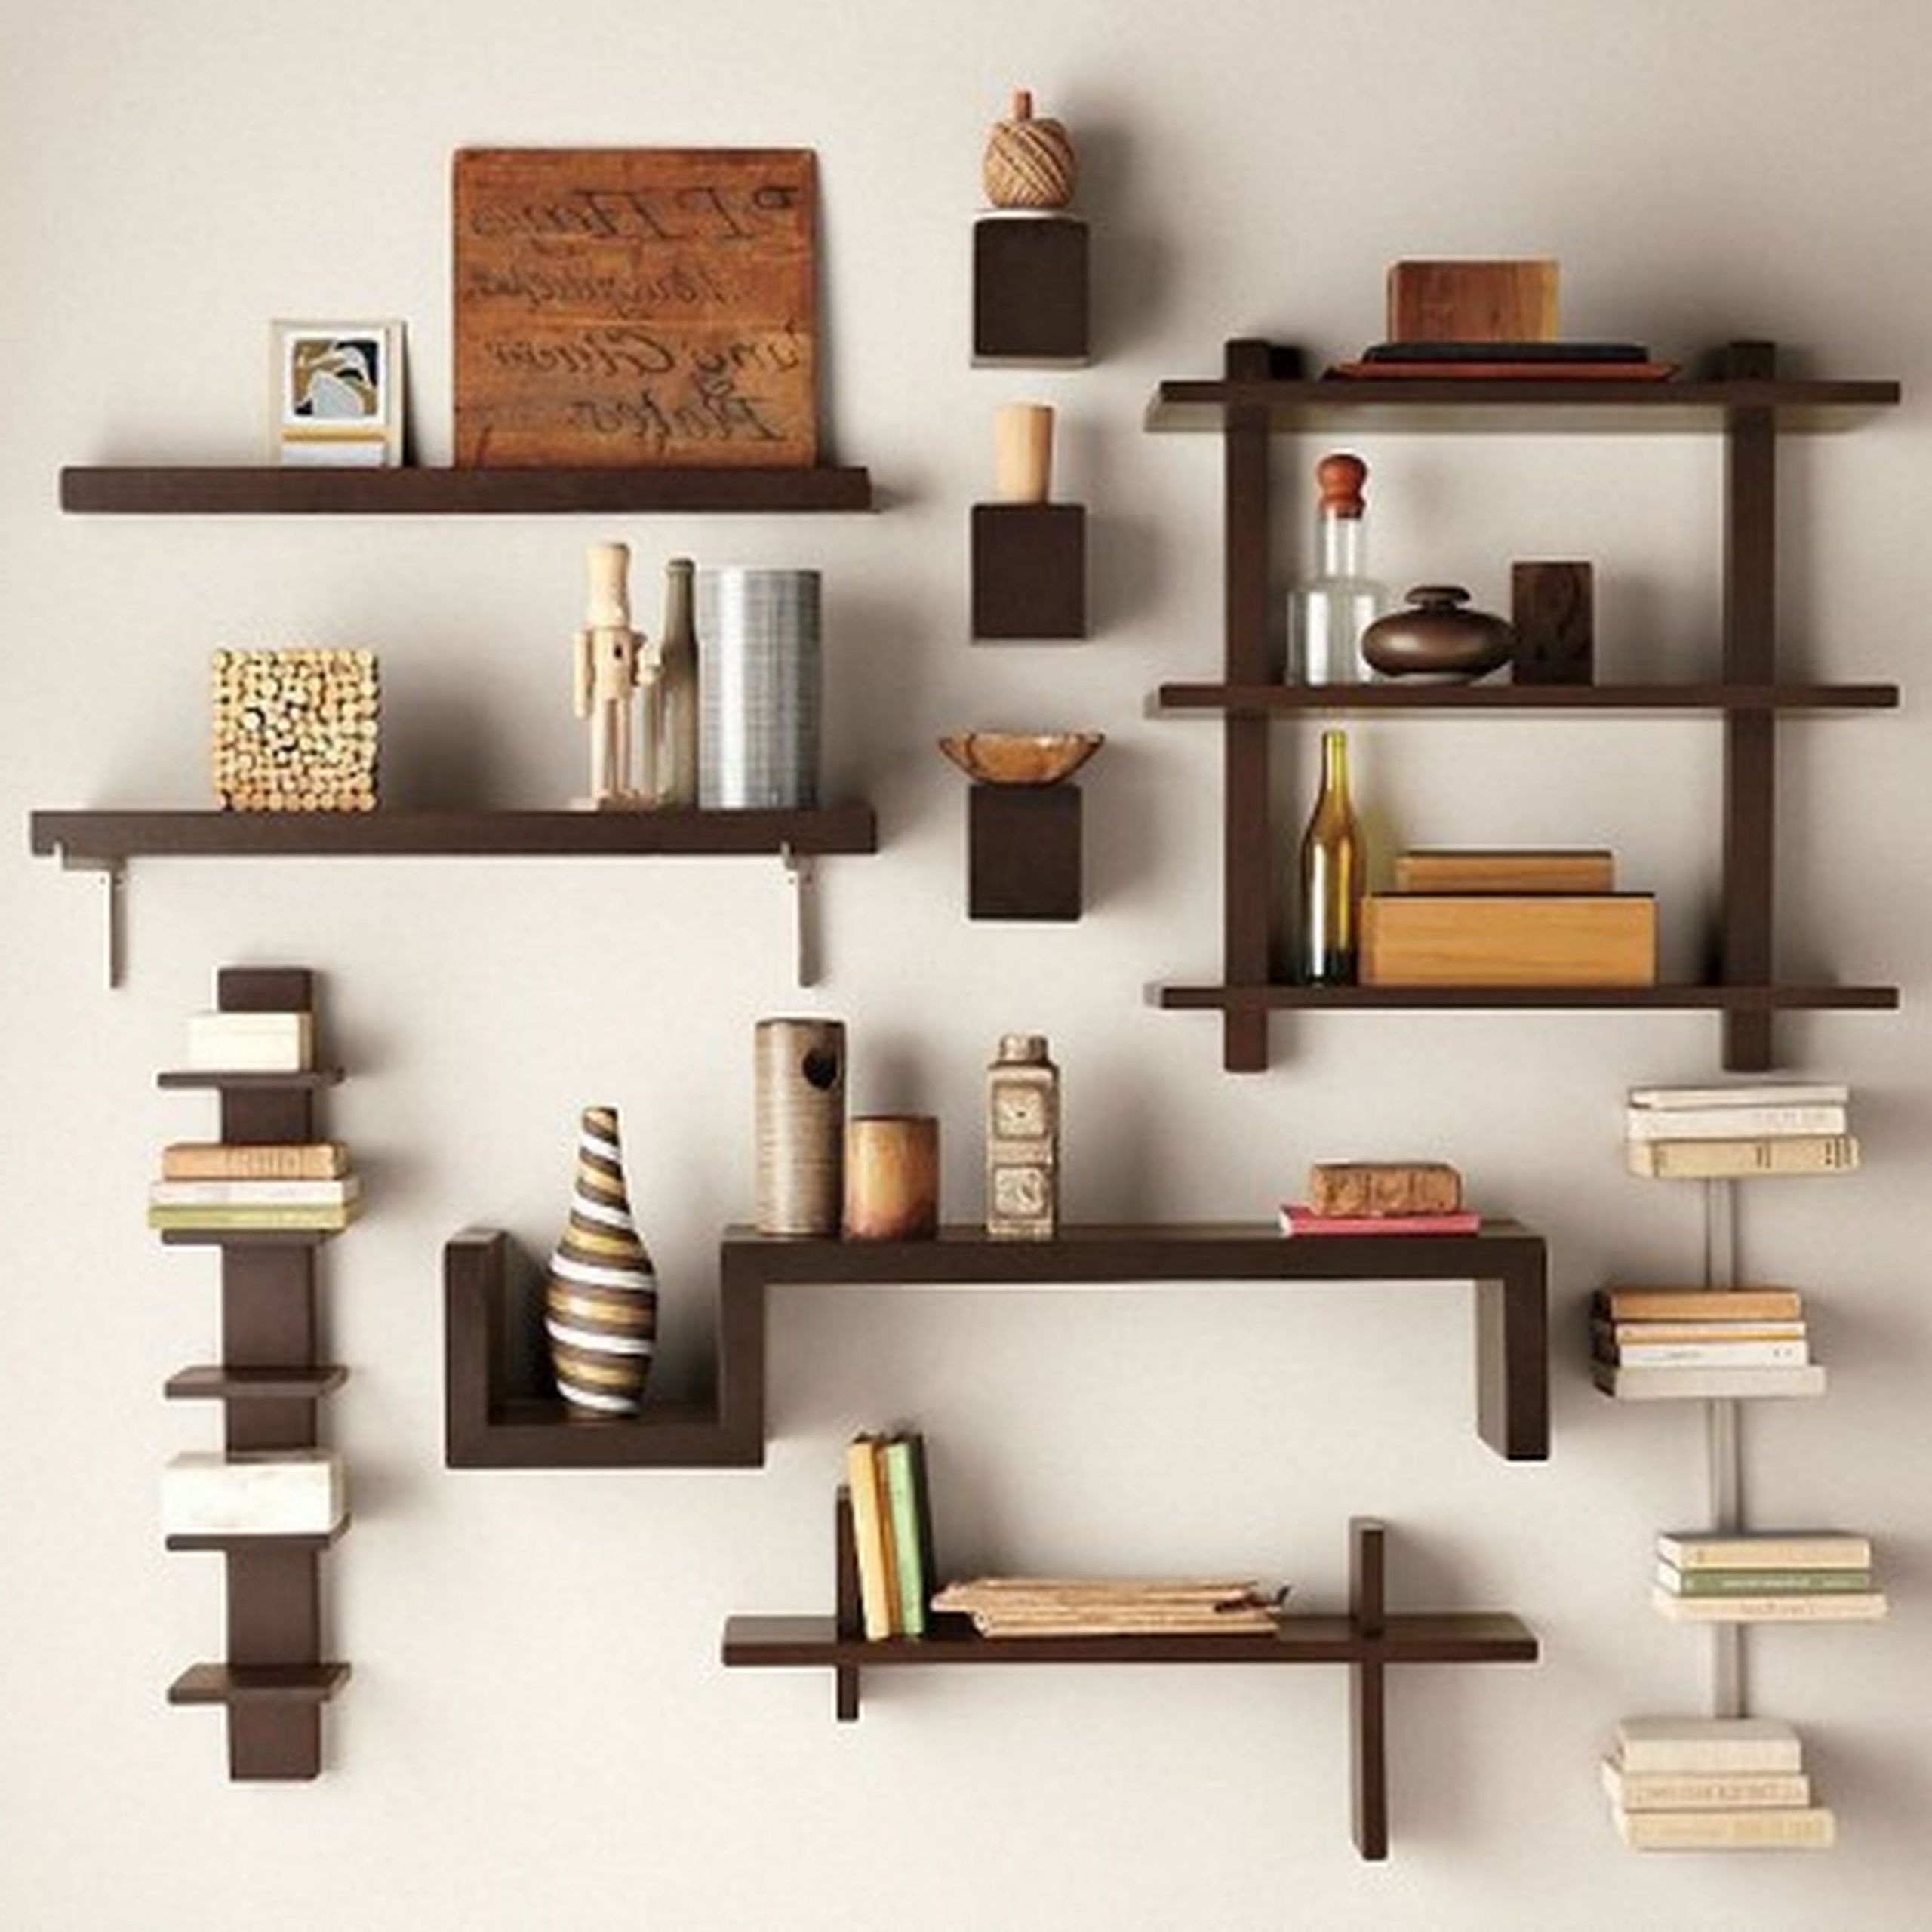 Living Room Wall Shelves Ideas
 Decorate Rooms with Decorative Shelving Unit – HomesFeed